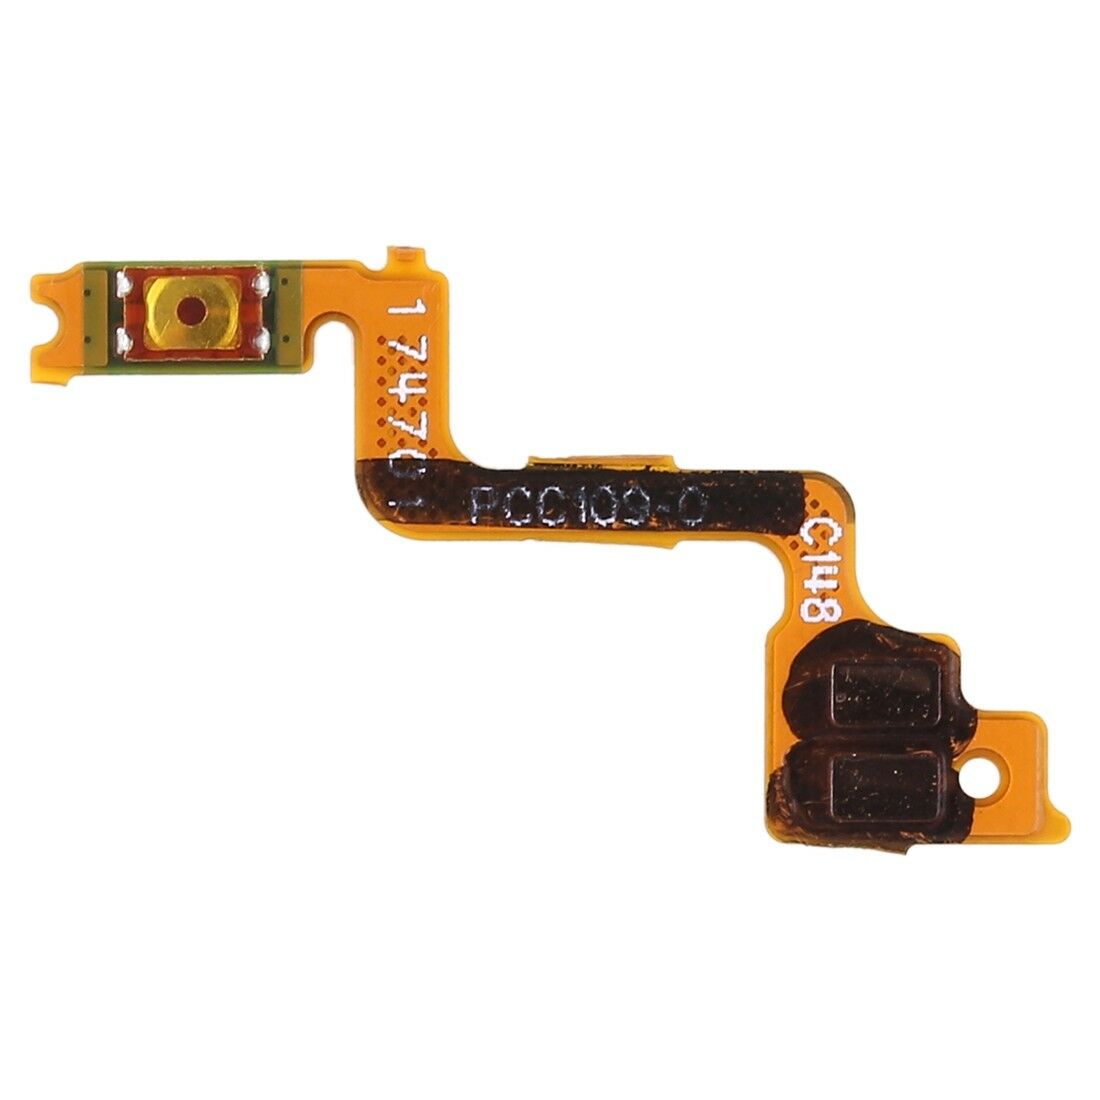 OEM Power On/Off Button Flex Cable Replacement Part for OPPO R11s Plus